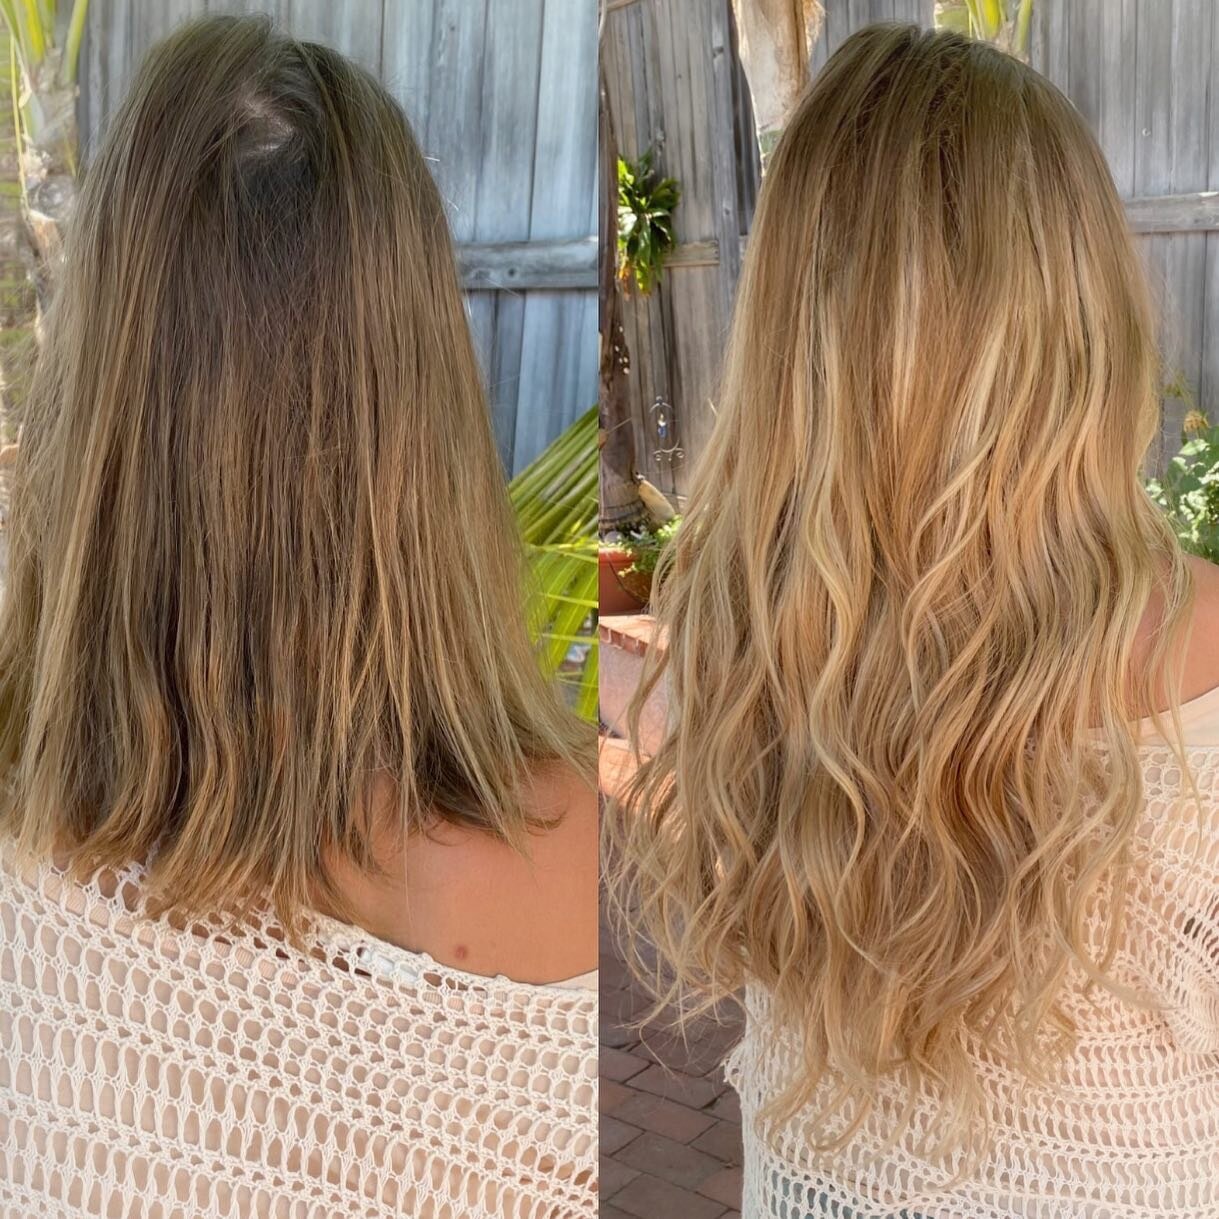 Adding length and highlights in under a minute? Only with the #wigstension 

Get the look you always dreamed of with no commitment or damage! 
 
.
.
#beforeandafter #beforeandafterhair #hairextensions #upart #glamhair #bighair #hairstyles #weddinghai